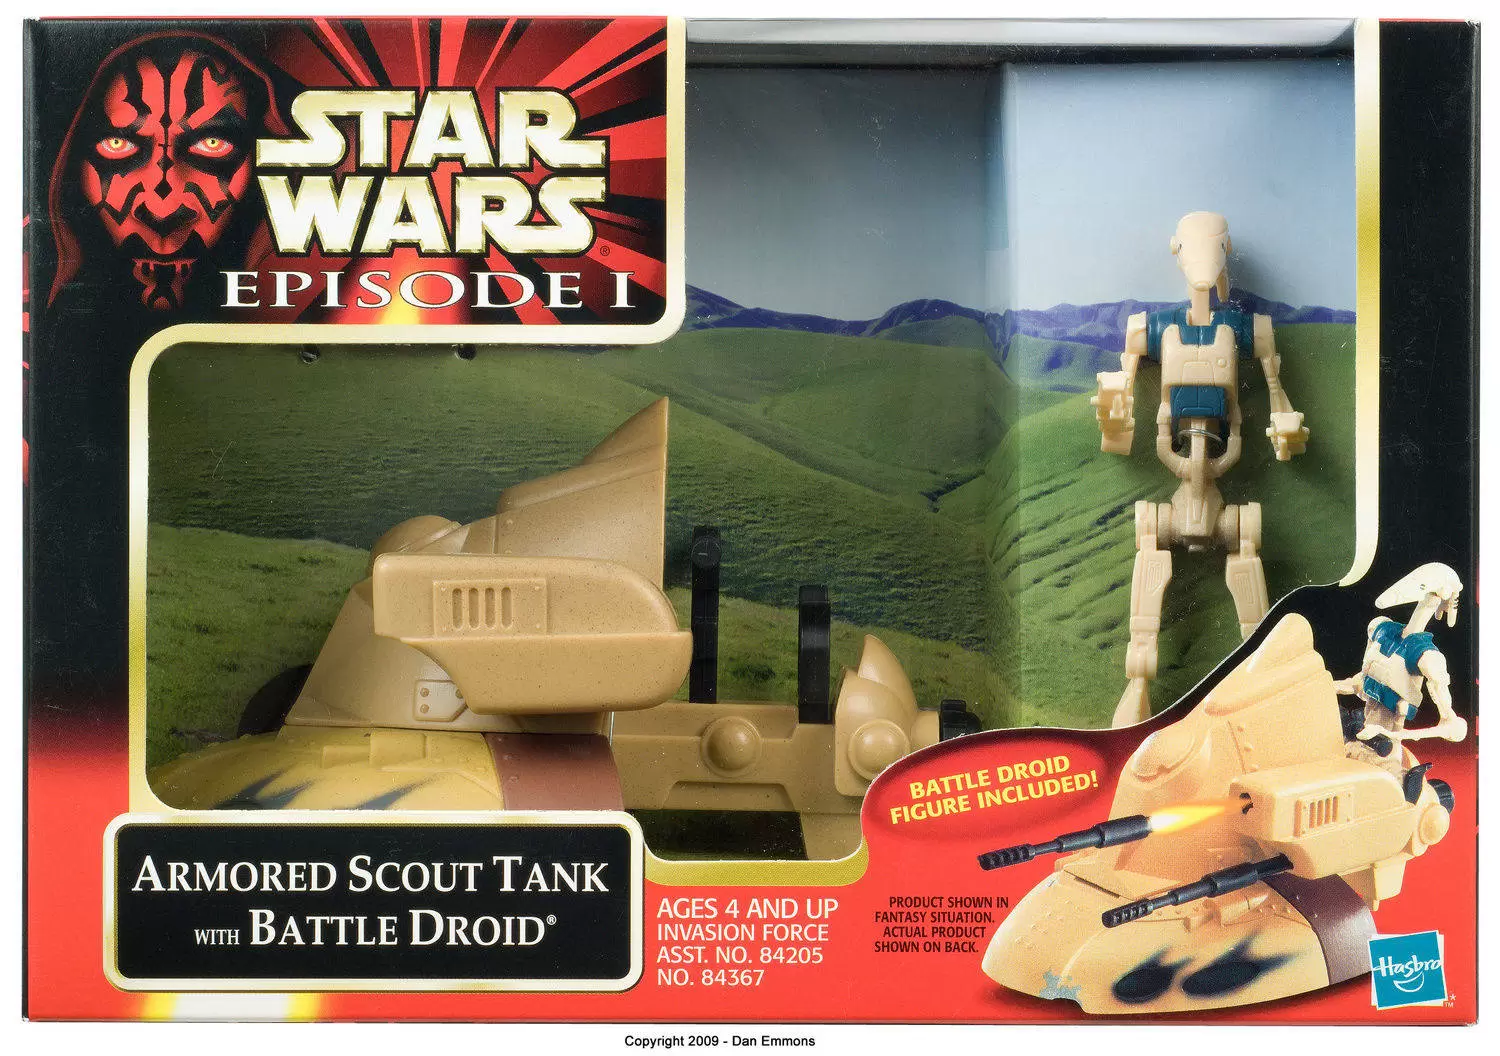 Armored Scout Tank with Battle Droid - Episode 1 action figure